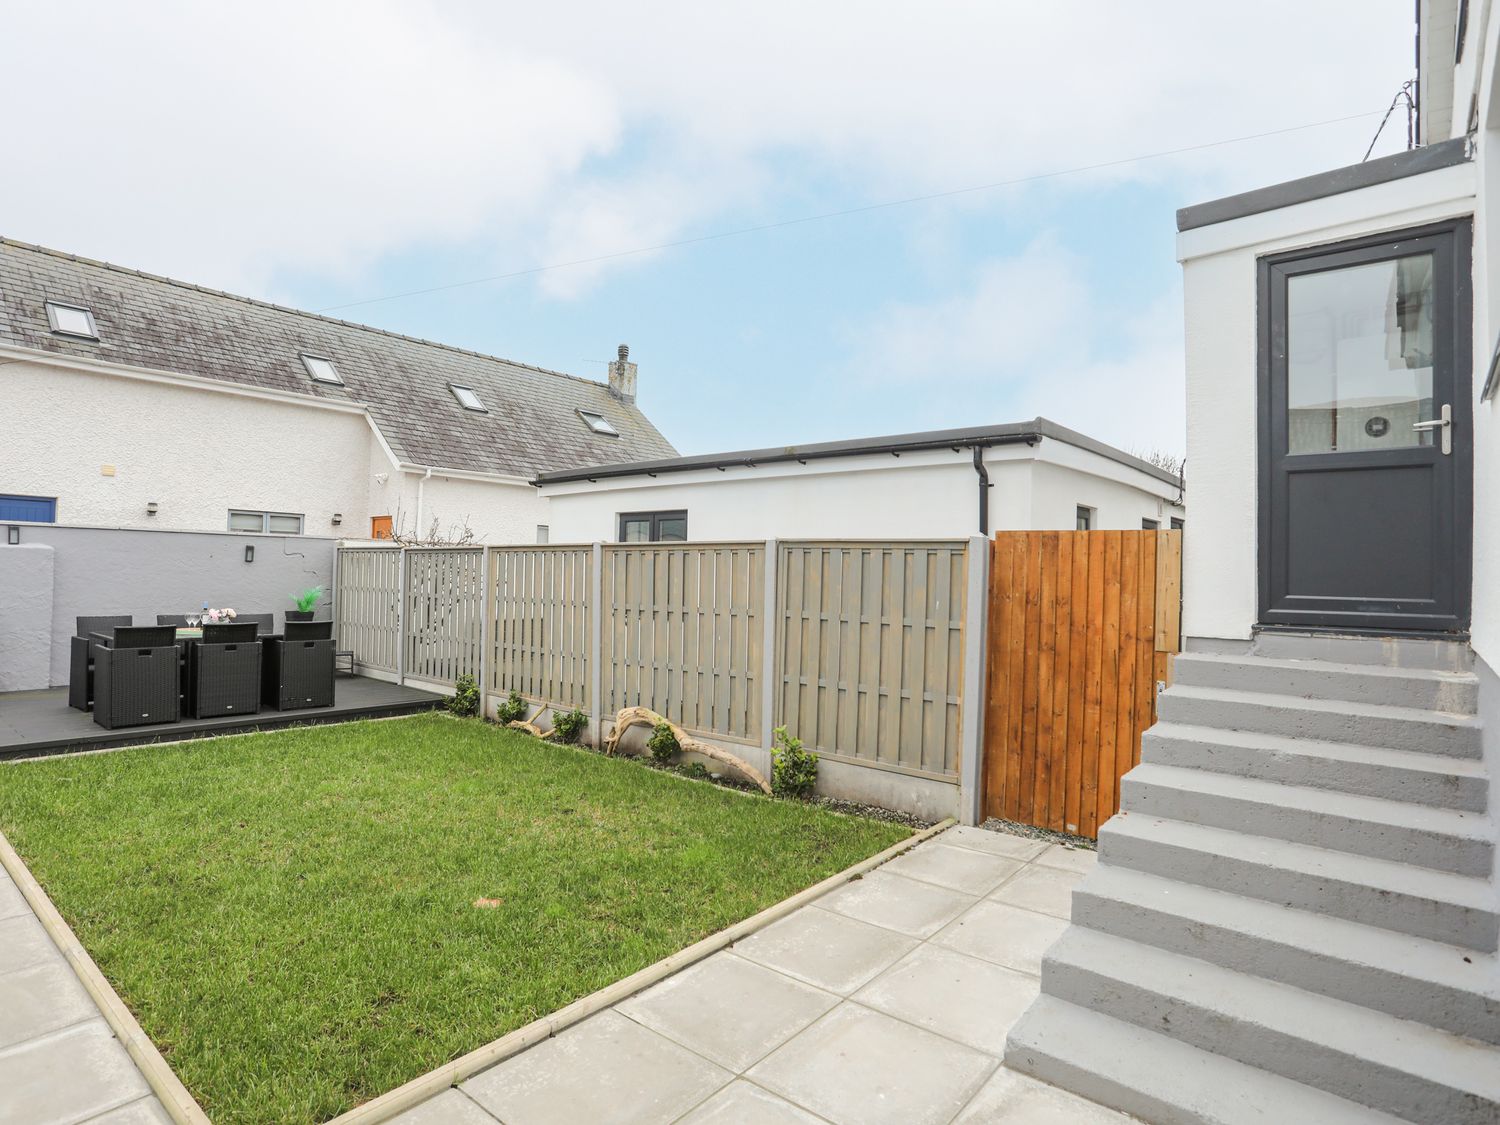 Clydfan, No 1 Trearddur Road in Trearddur Bay on the Isle of Anglesey. Pet-friendly cottage. Hot tub